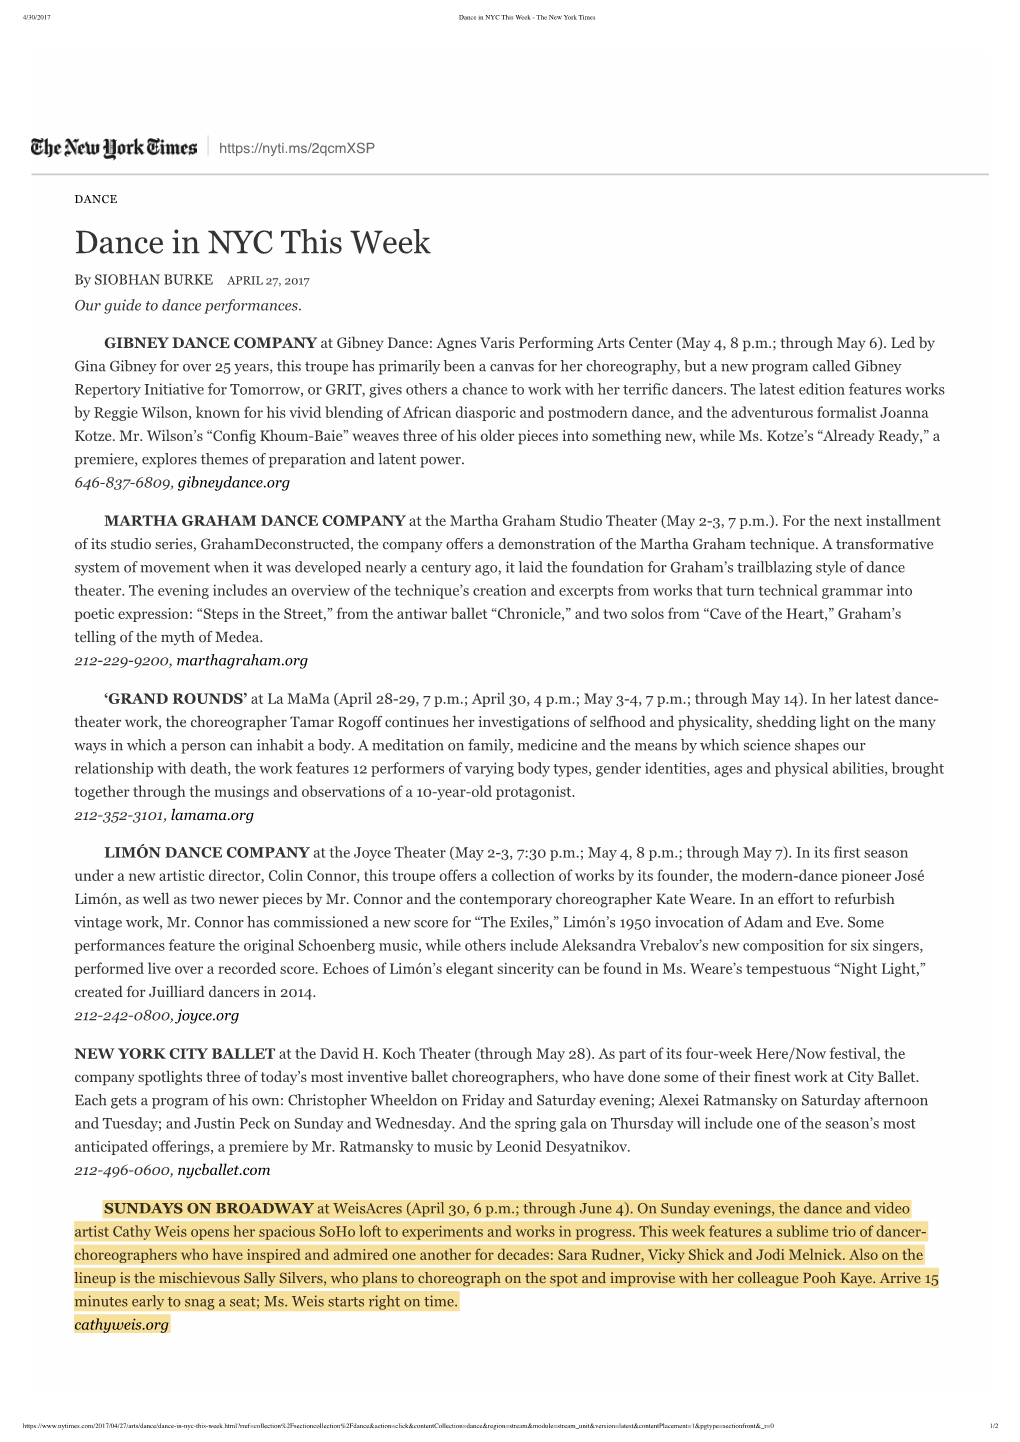 Dance in NYC This Week - the New York Times